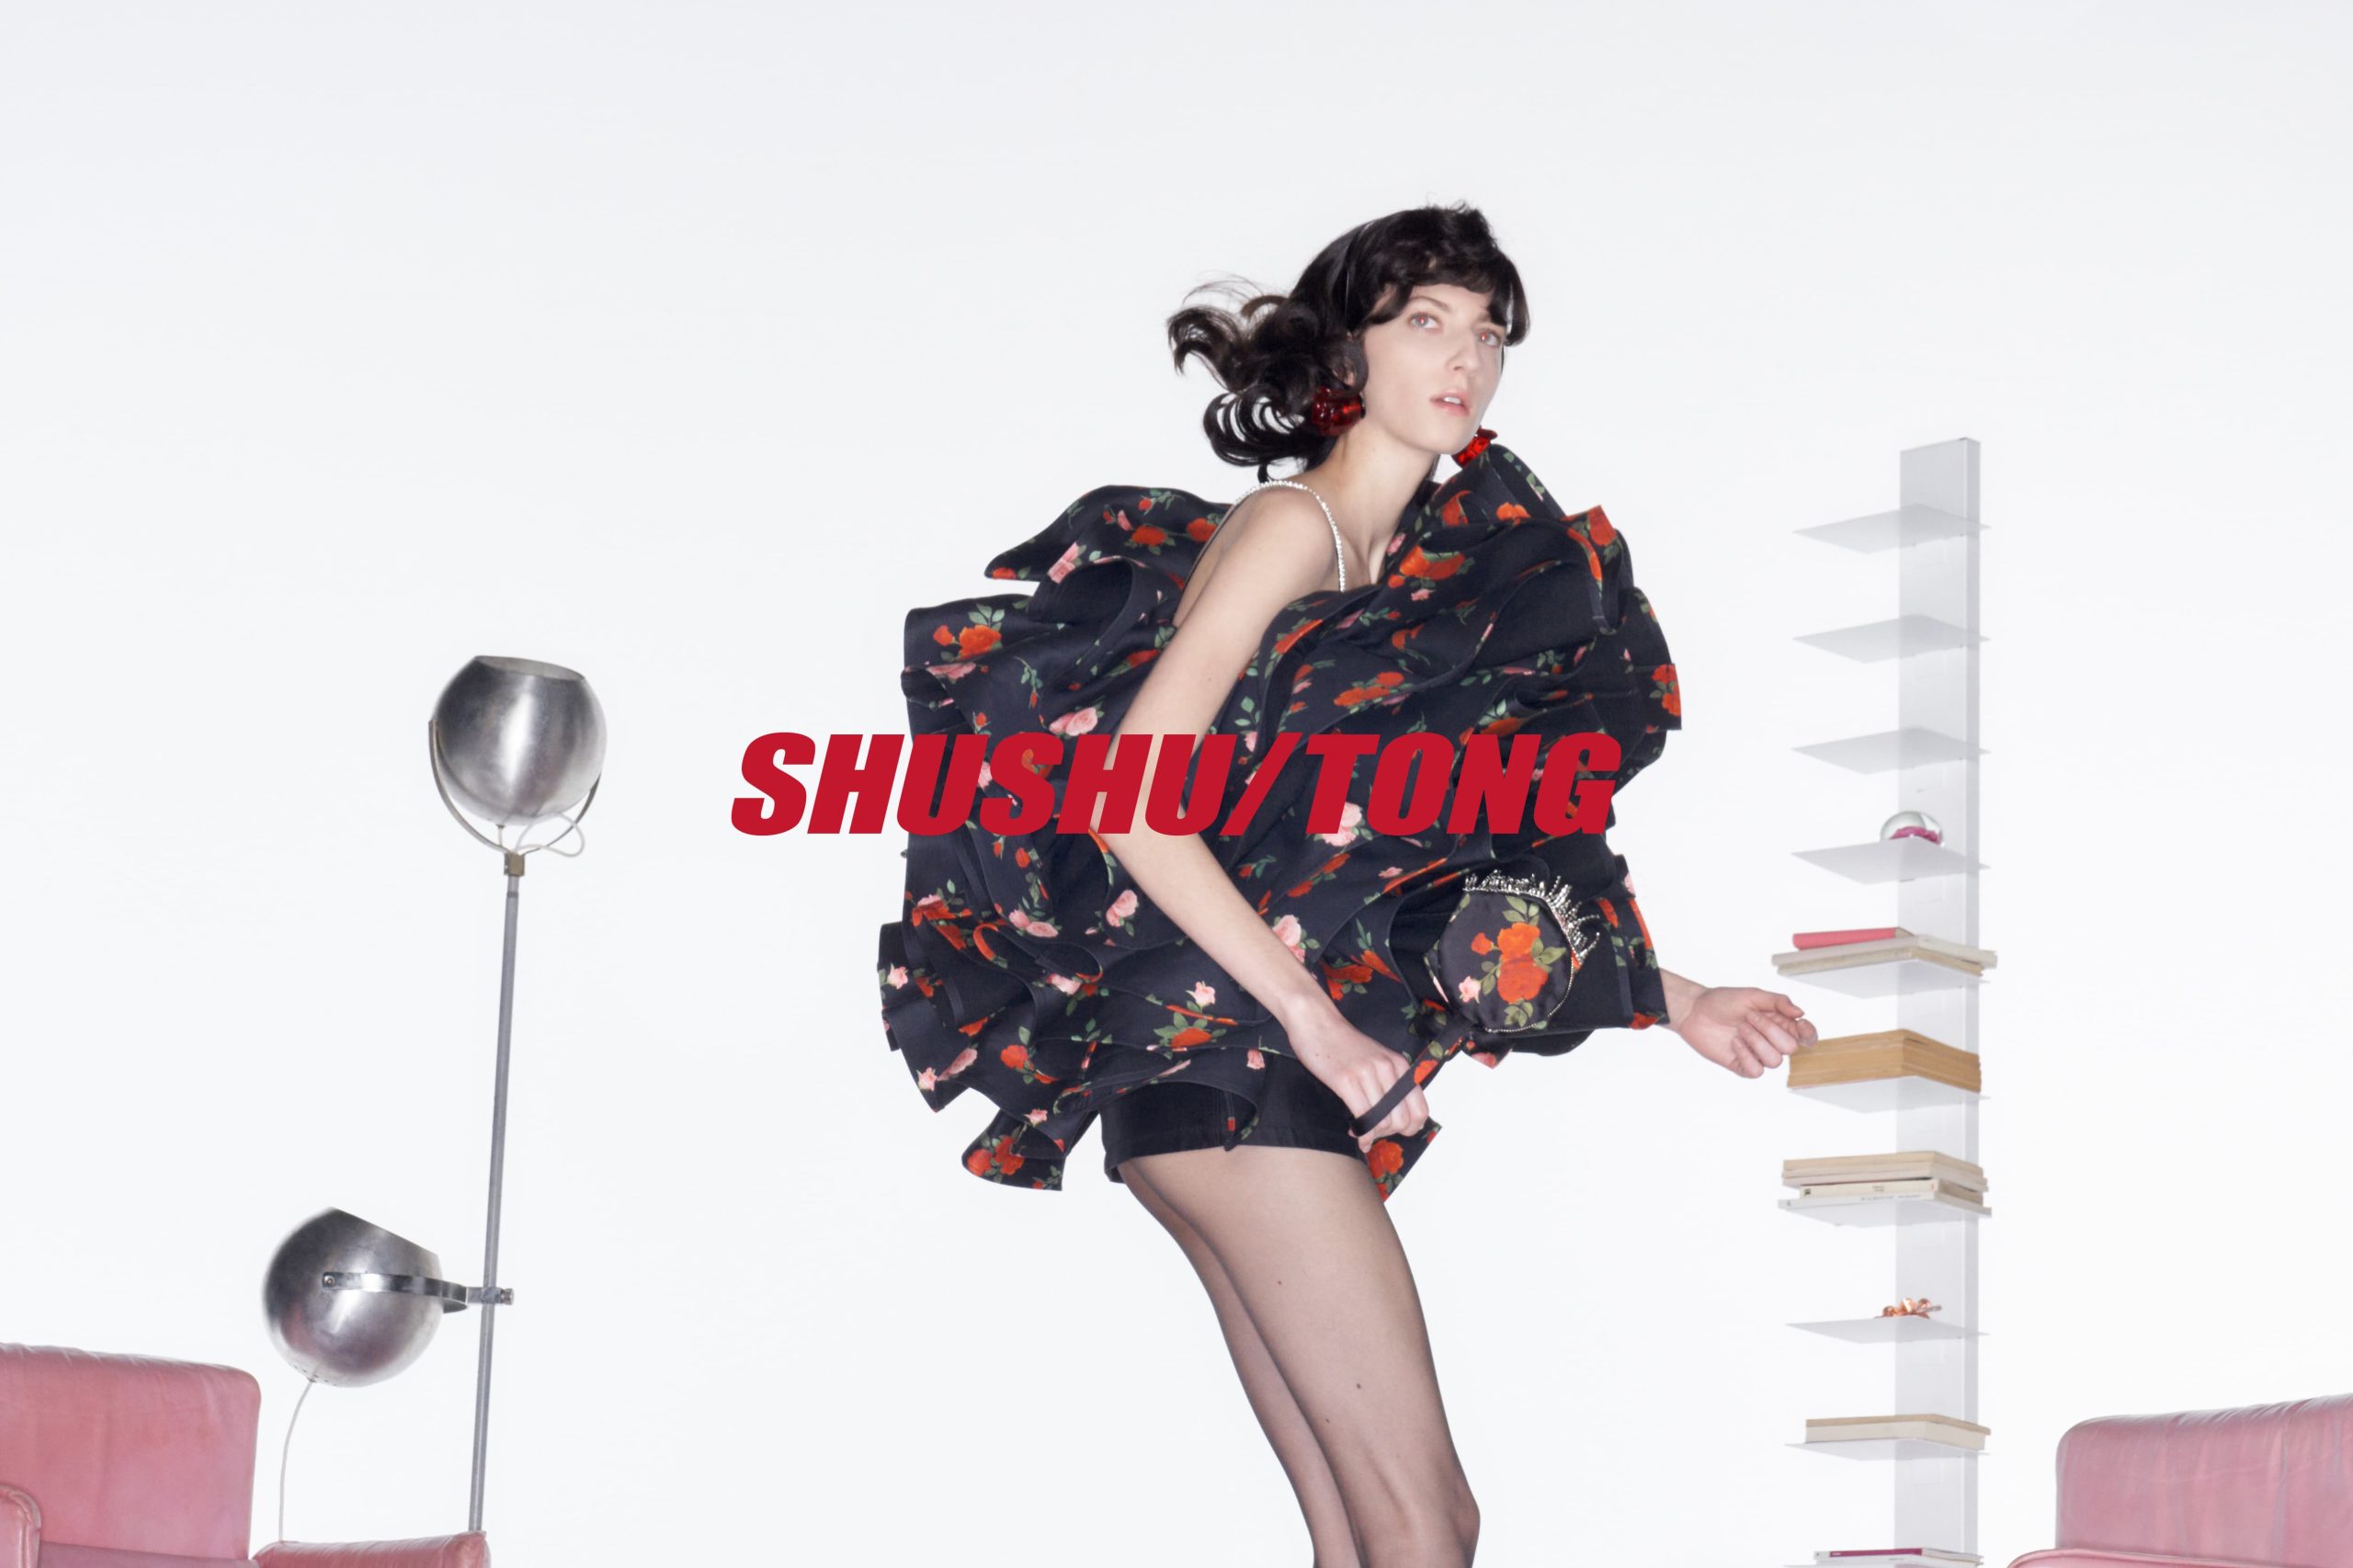 Shushu/Tong Spring 2023 Ad Campaign Review | The Impression